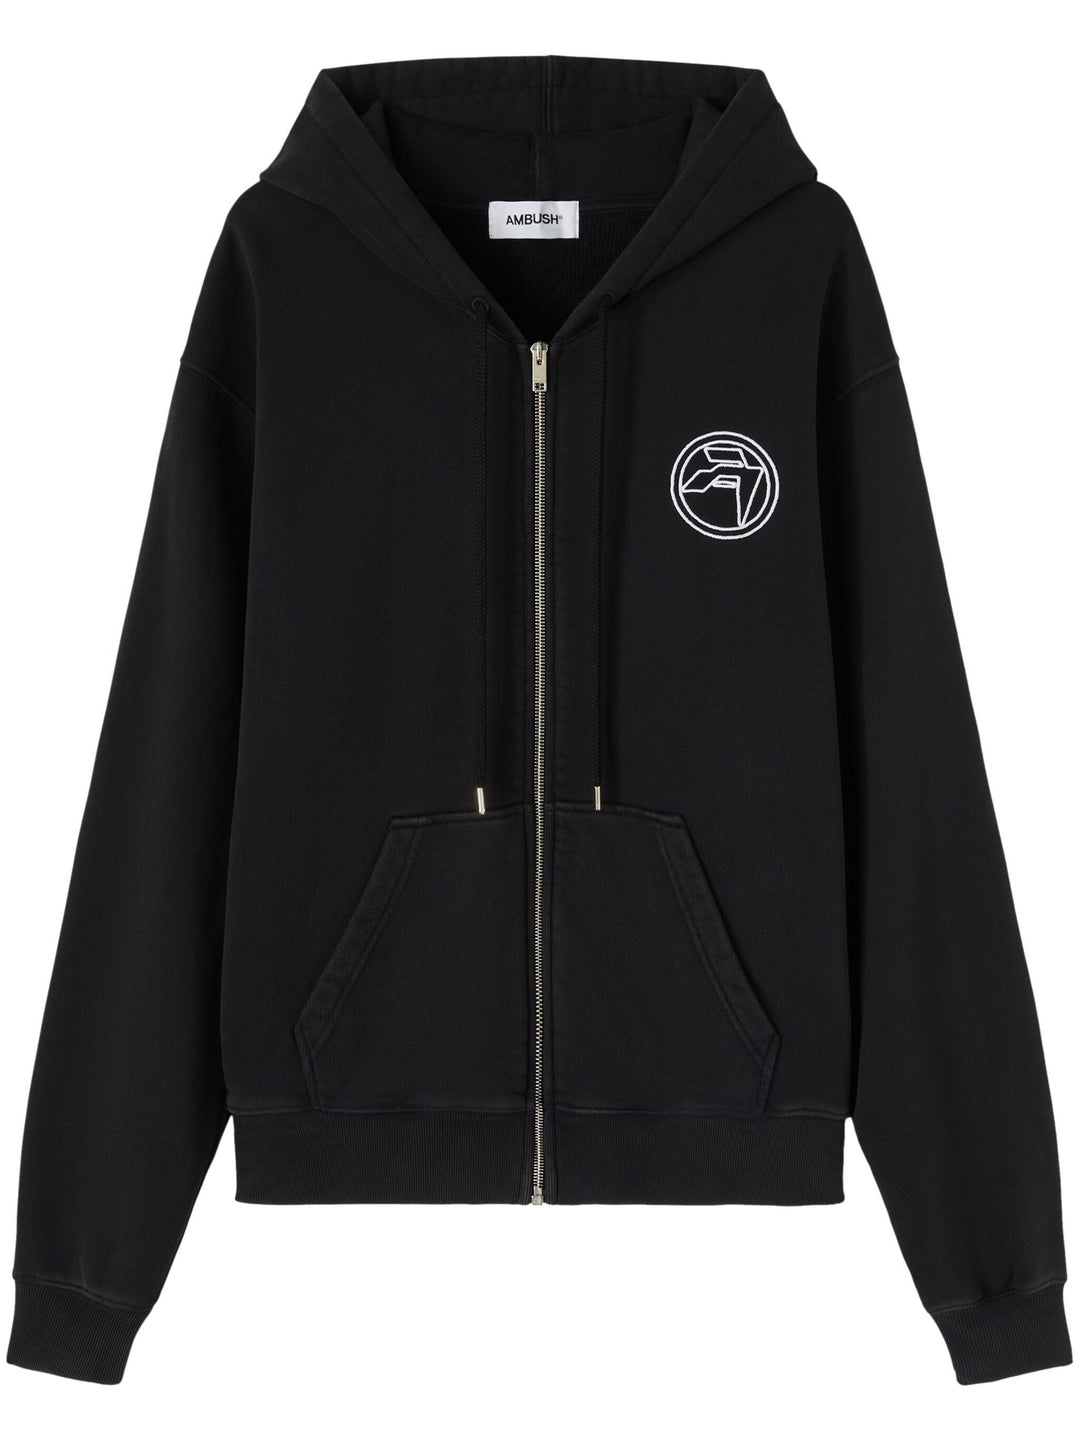 Embroidered Emblem Zip Up Sweater